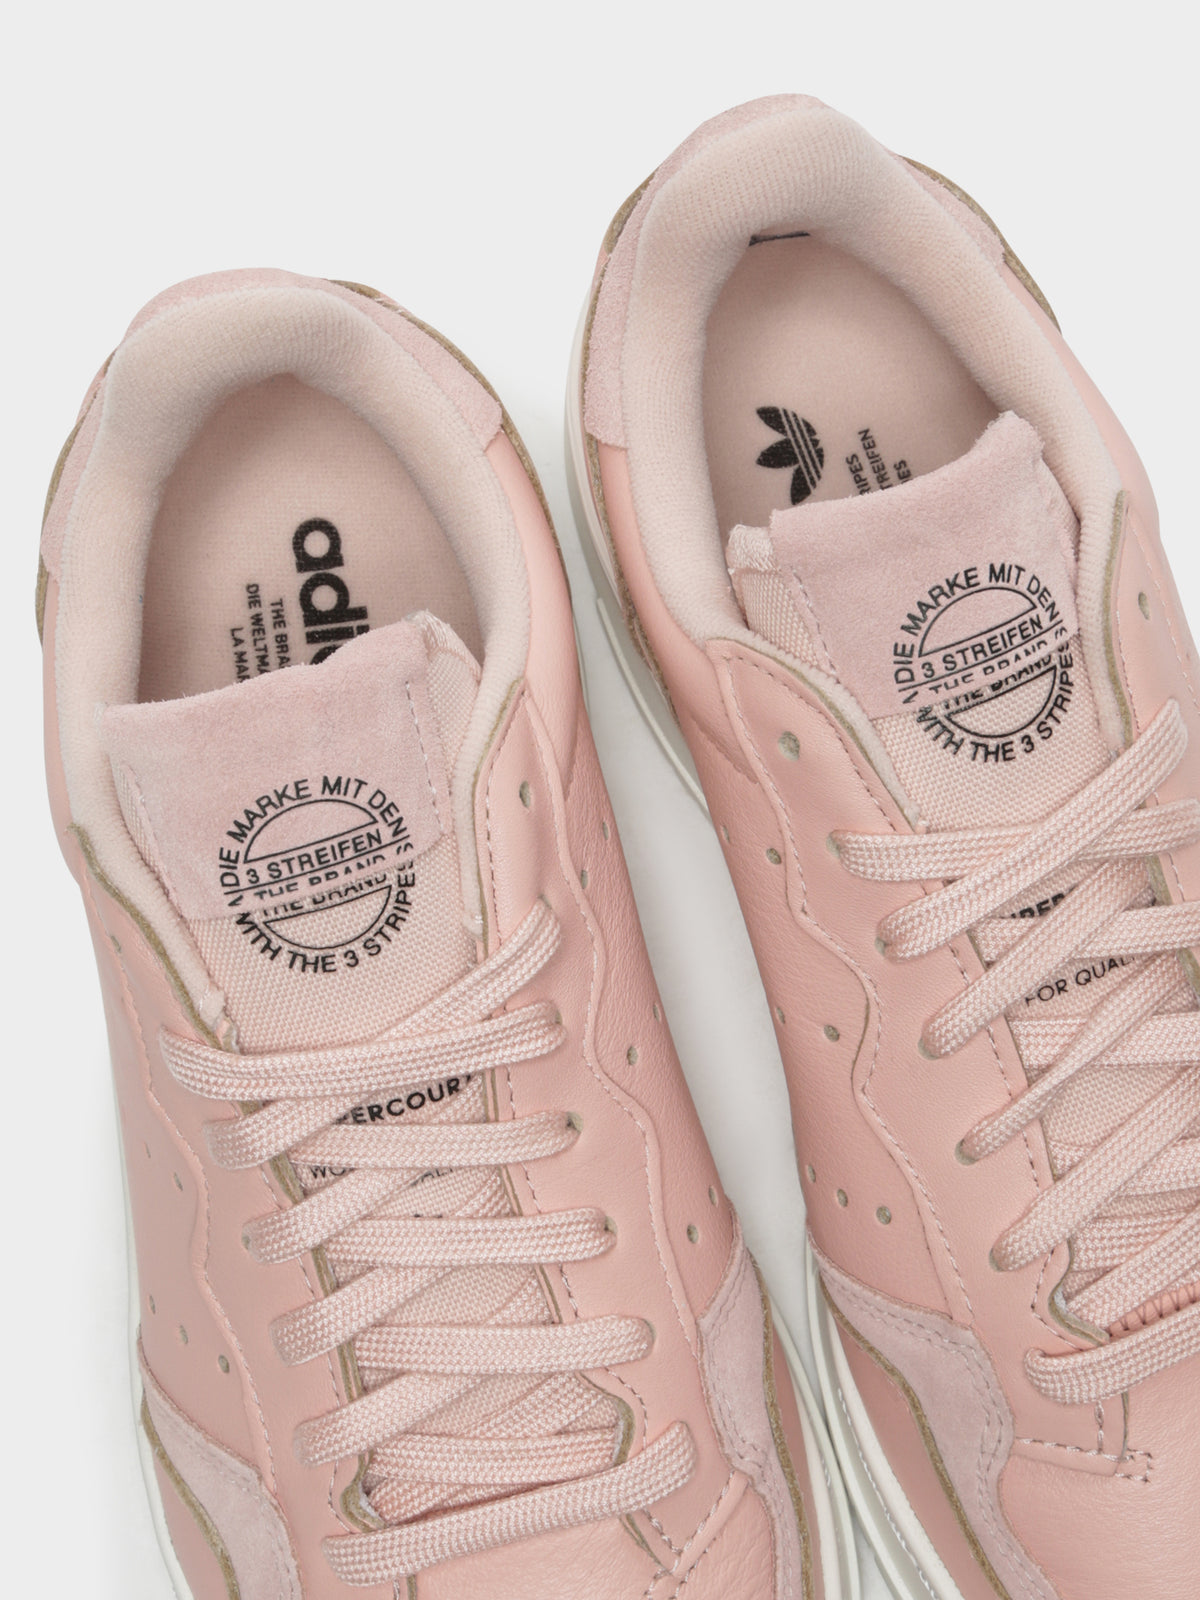 Supercourt Leather Sneaker in Pink